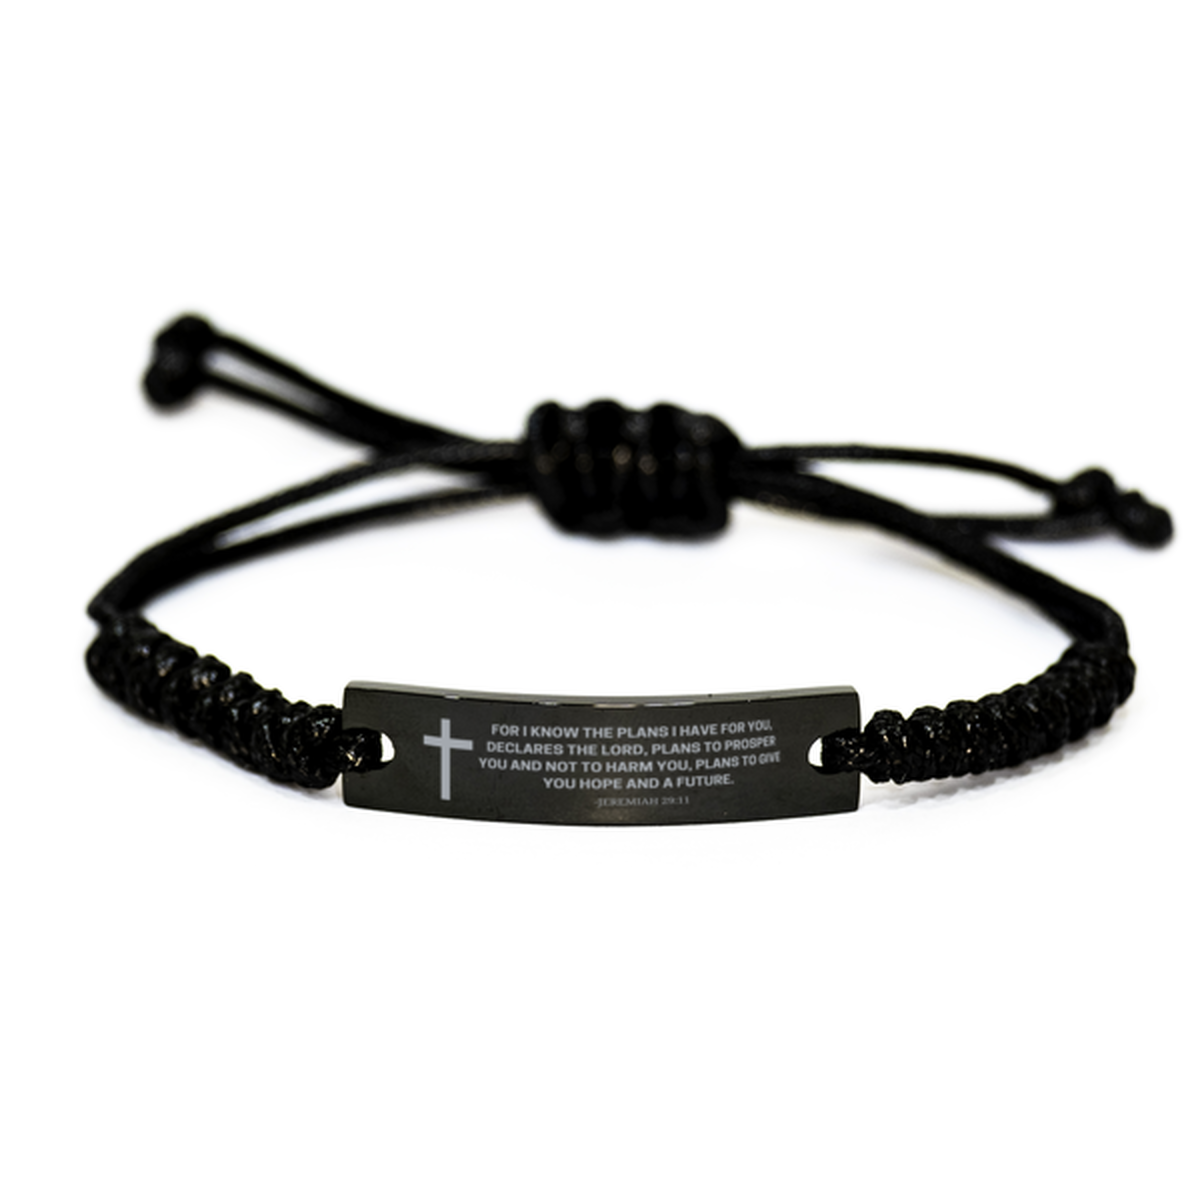 Baptism Gifts For Teenage Boys Girls, Christian Bible Verse Black Rope Bracelet, For I know the plans, Catholic Confirmation Gifts for Son, Godson, Grandson, Nephew